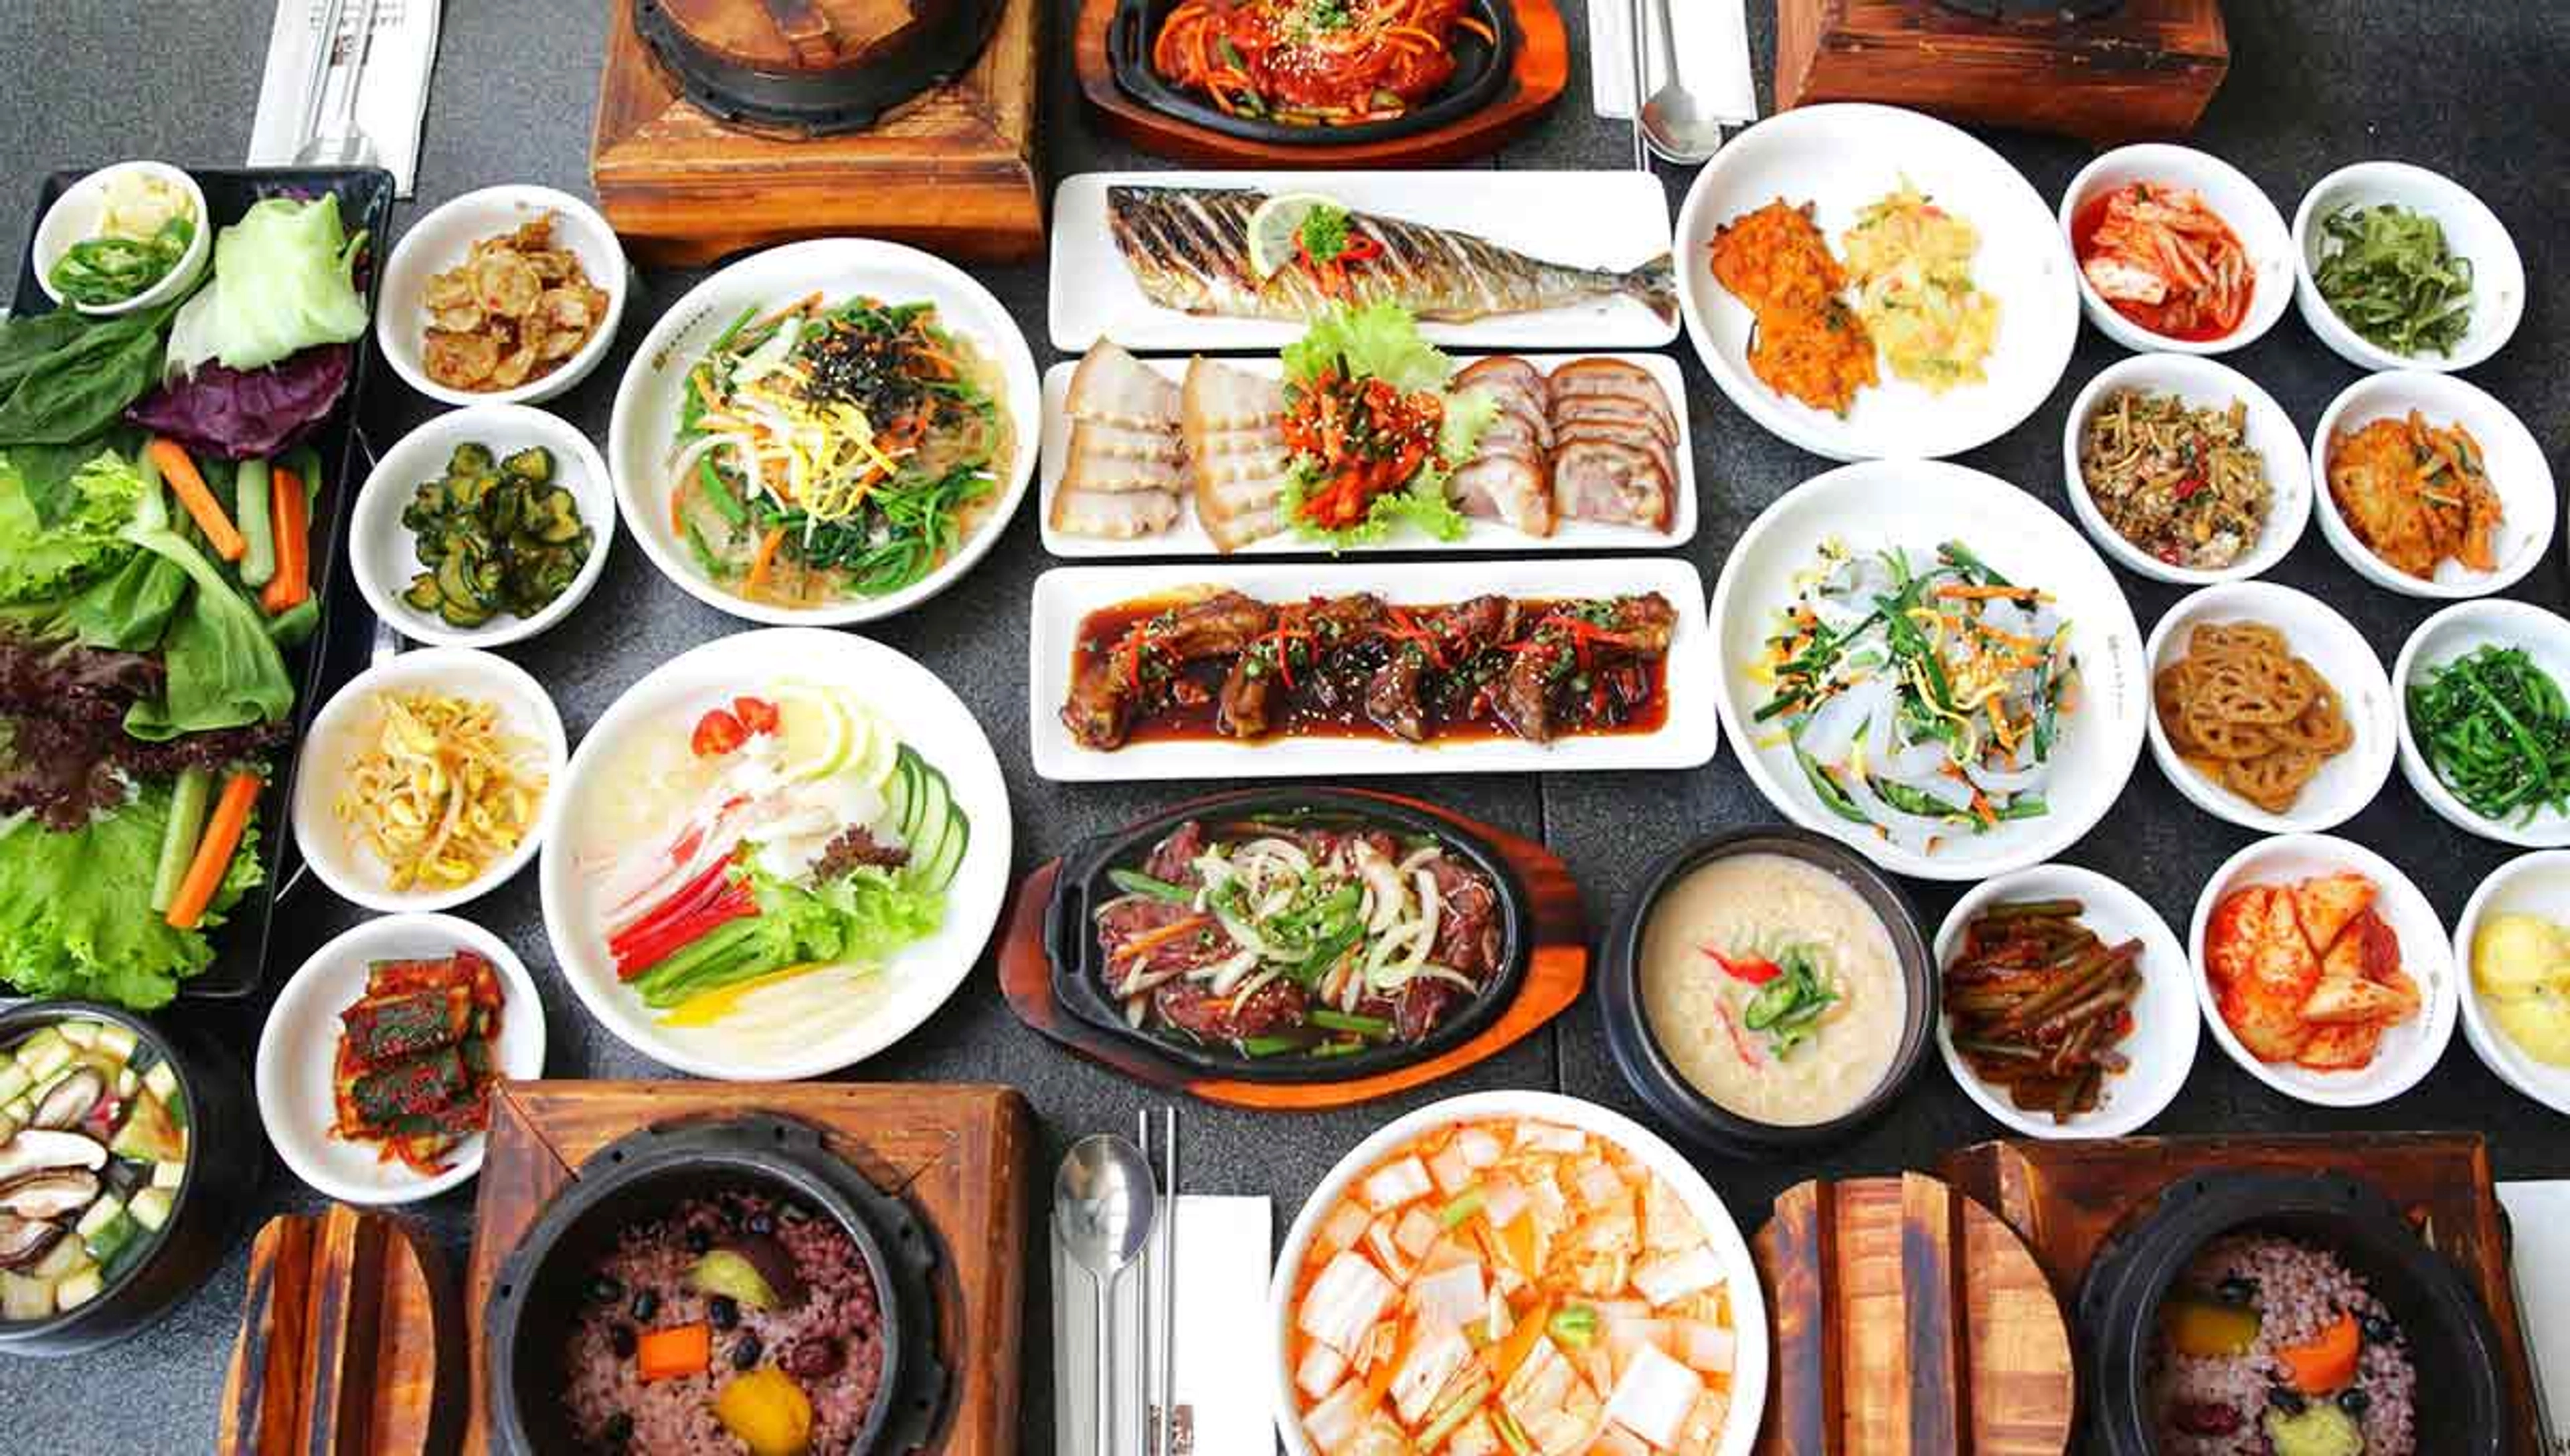 "Pick up" the top 10 cheap and delicious dishes in Saigon that you must try